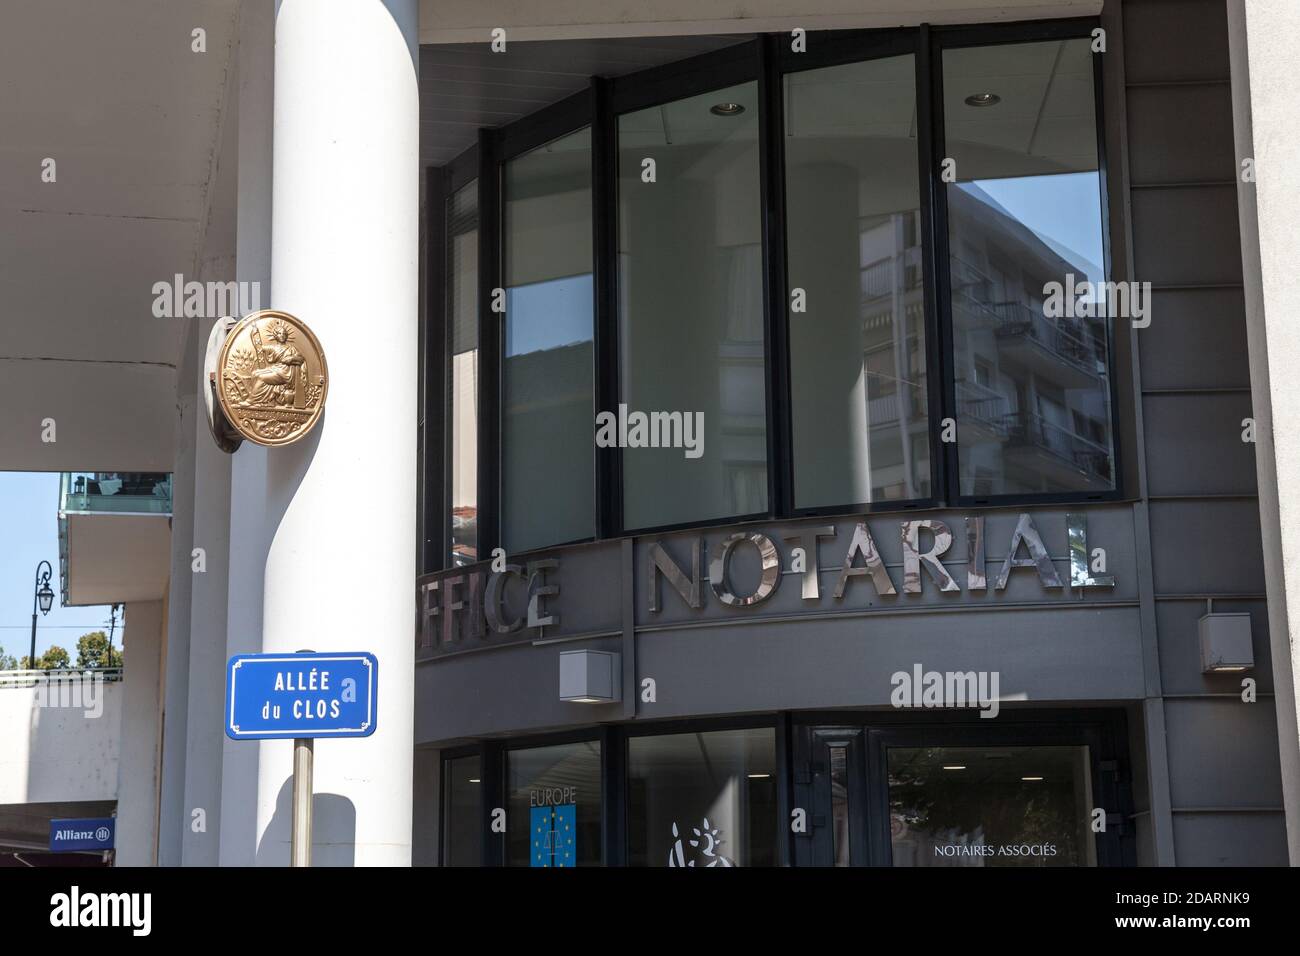 ANNEMASSE, FRANCE - JUNE 19, 2017: French Notary (Notaire) logo on a plate indicating its office in Annemasse.  An office Notarial in France is author Stock Photo